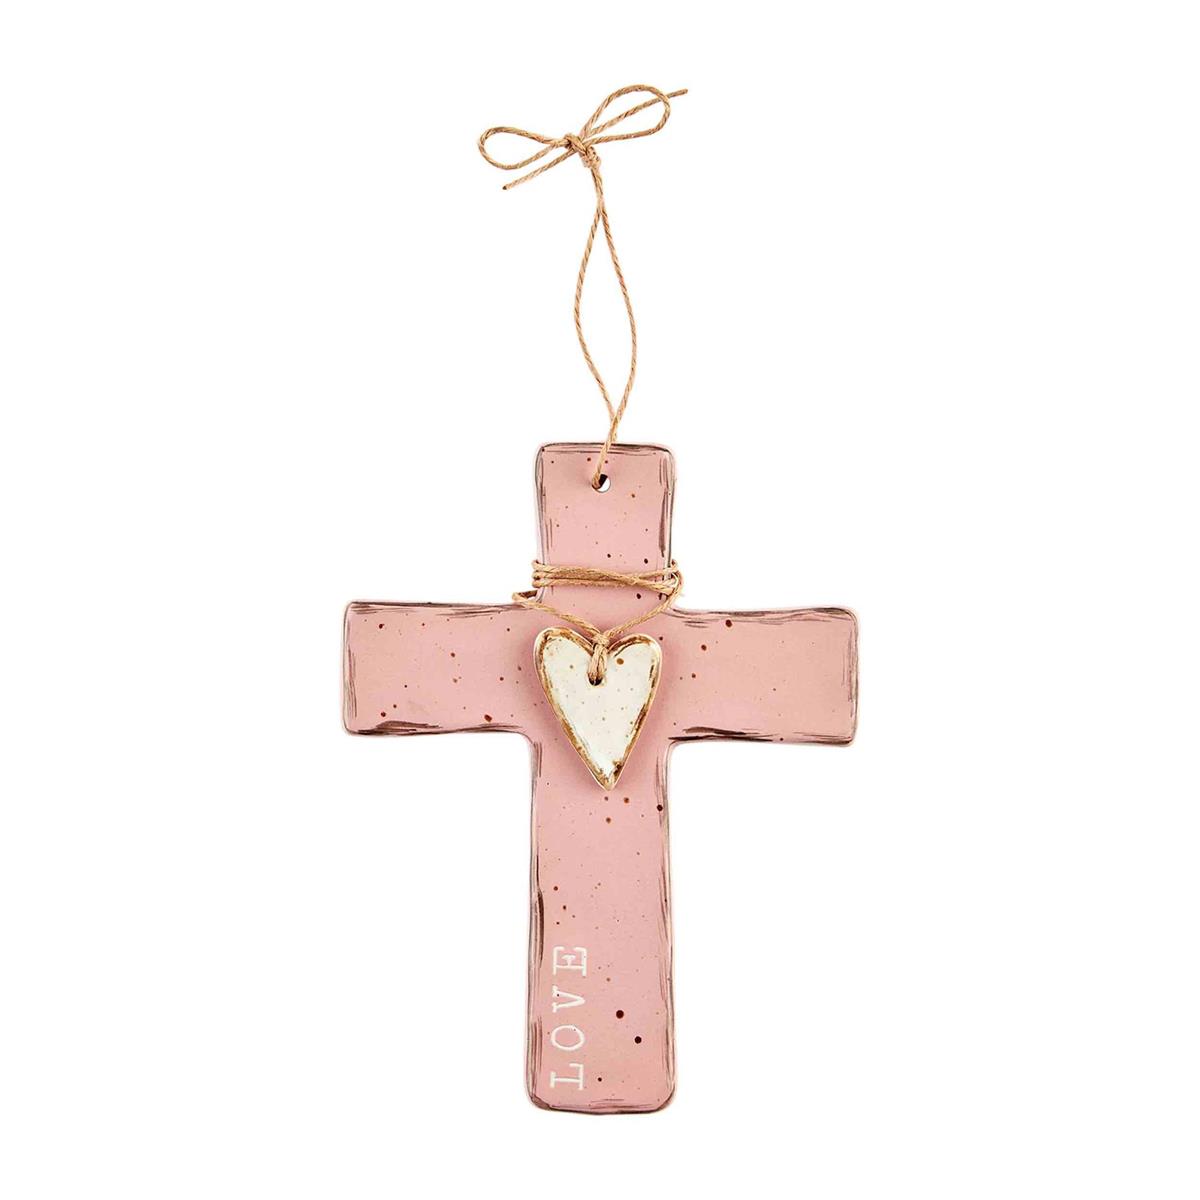 pink cross with white heart and :love" along the side against a white background